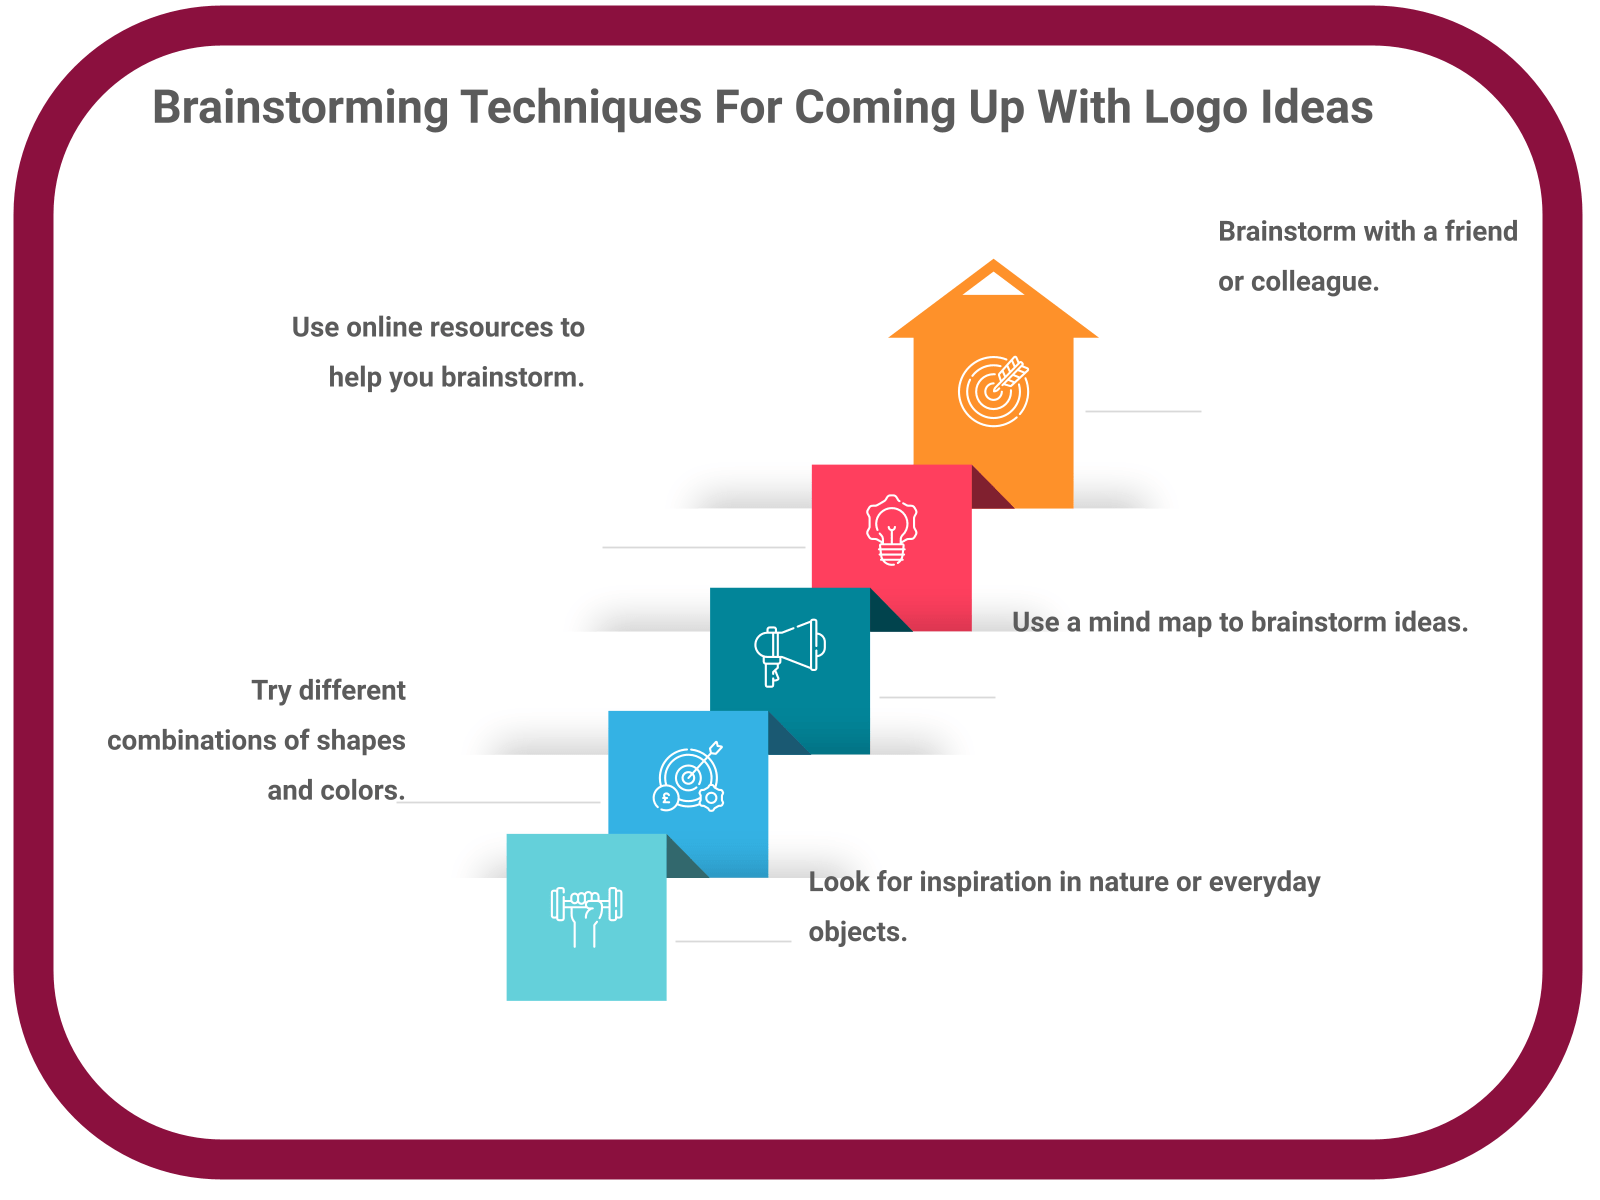 INFOGRAPHIC: Brainstorming techniques for coming up with logo ideas - Poll the People